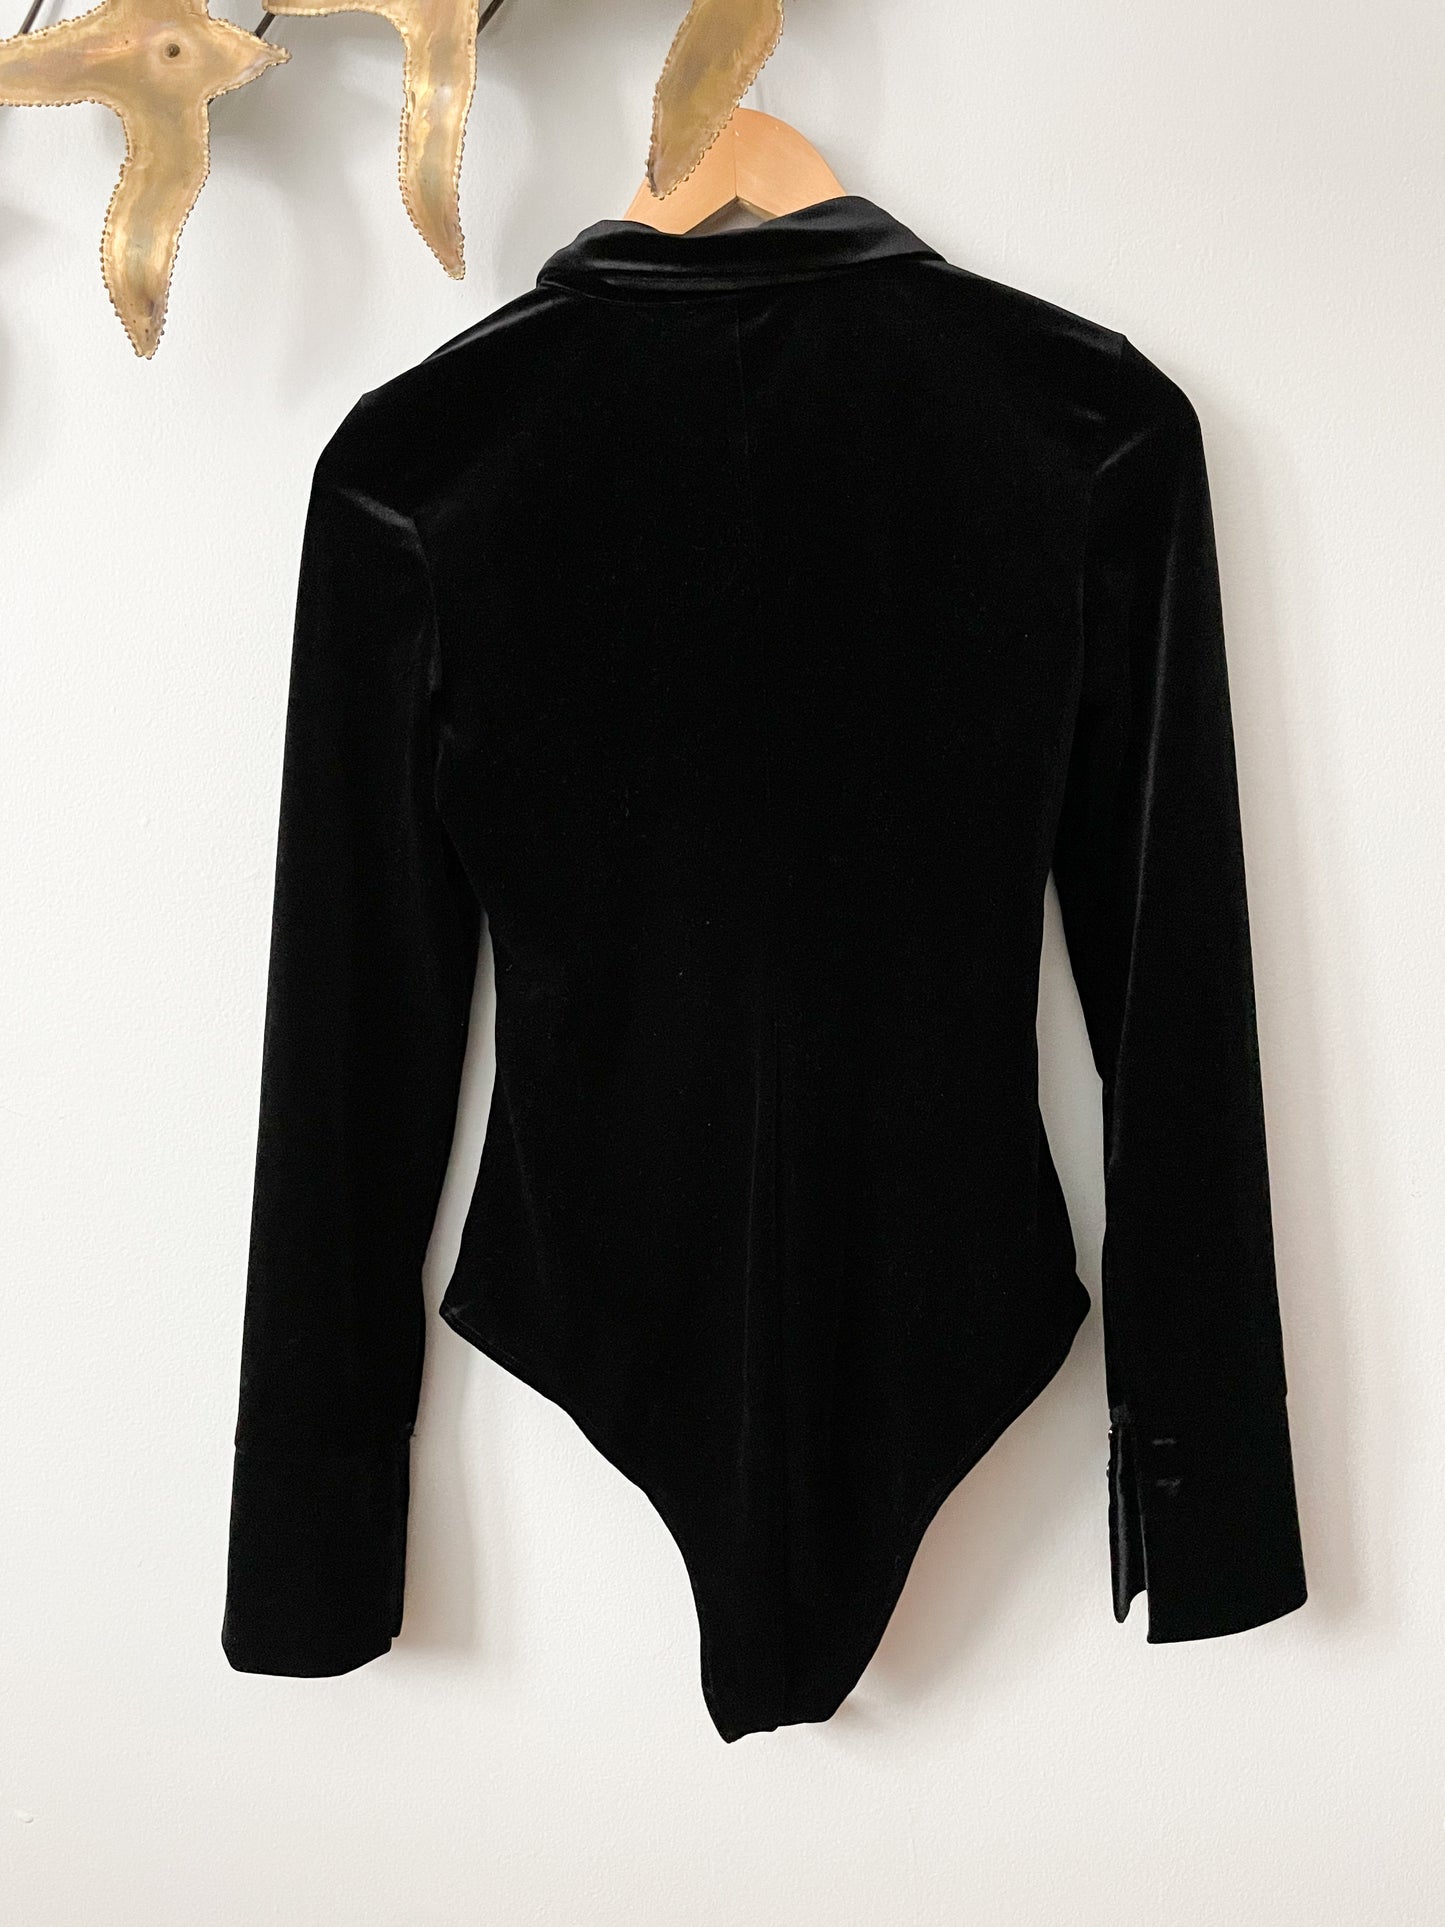 Zara Black Velvet Button Front Collared Rouched Stretch Long Sleeve Bodysuit - Small